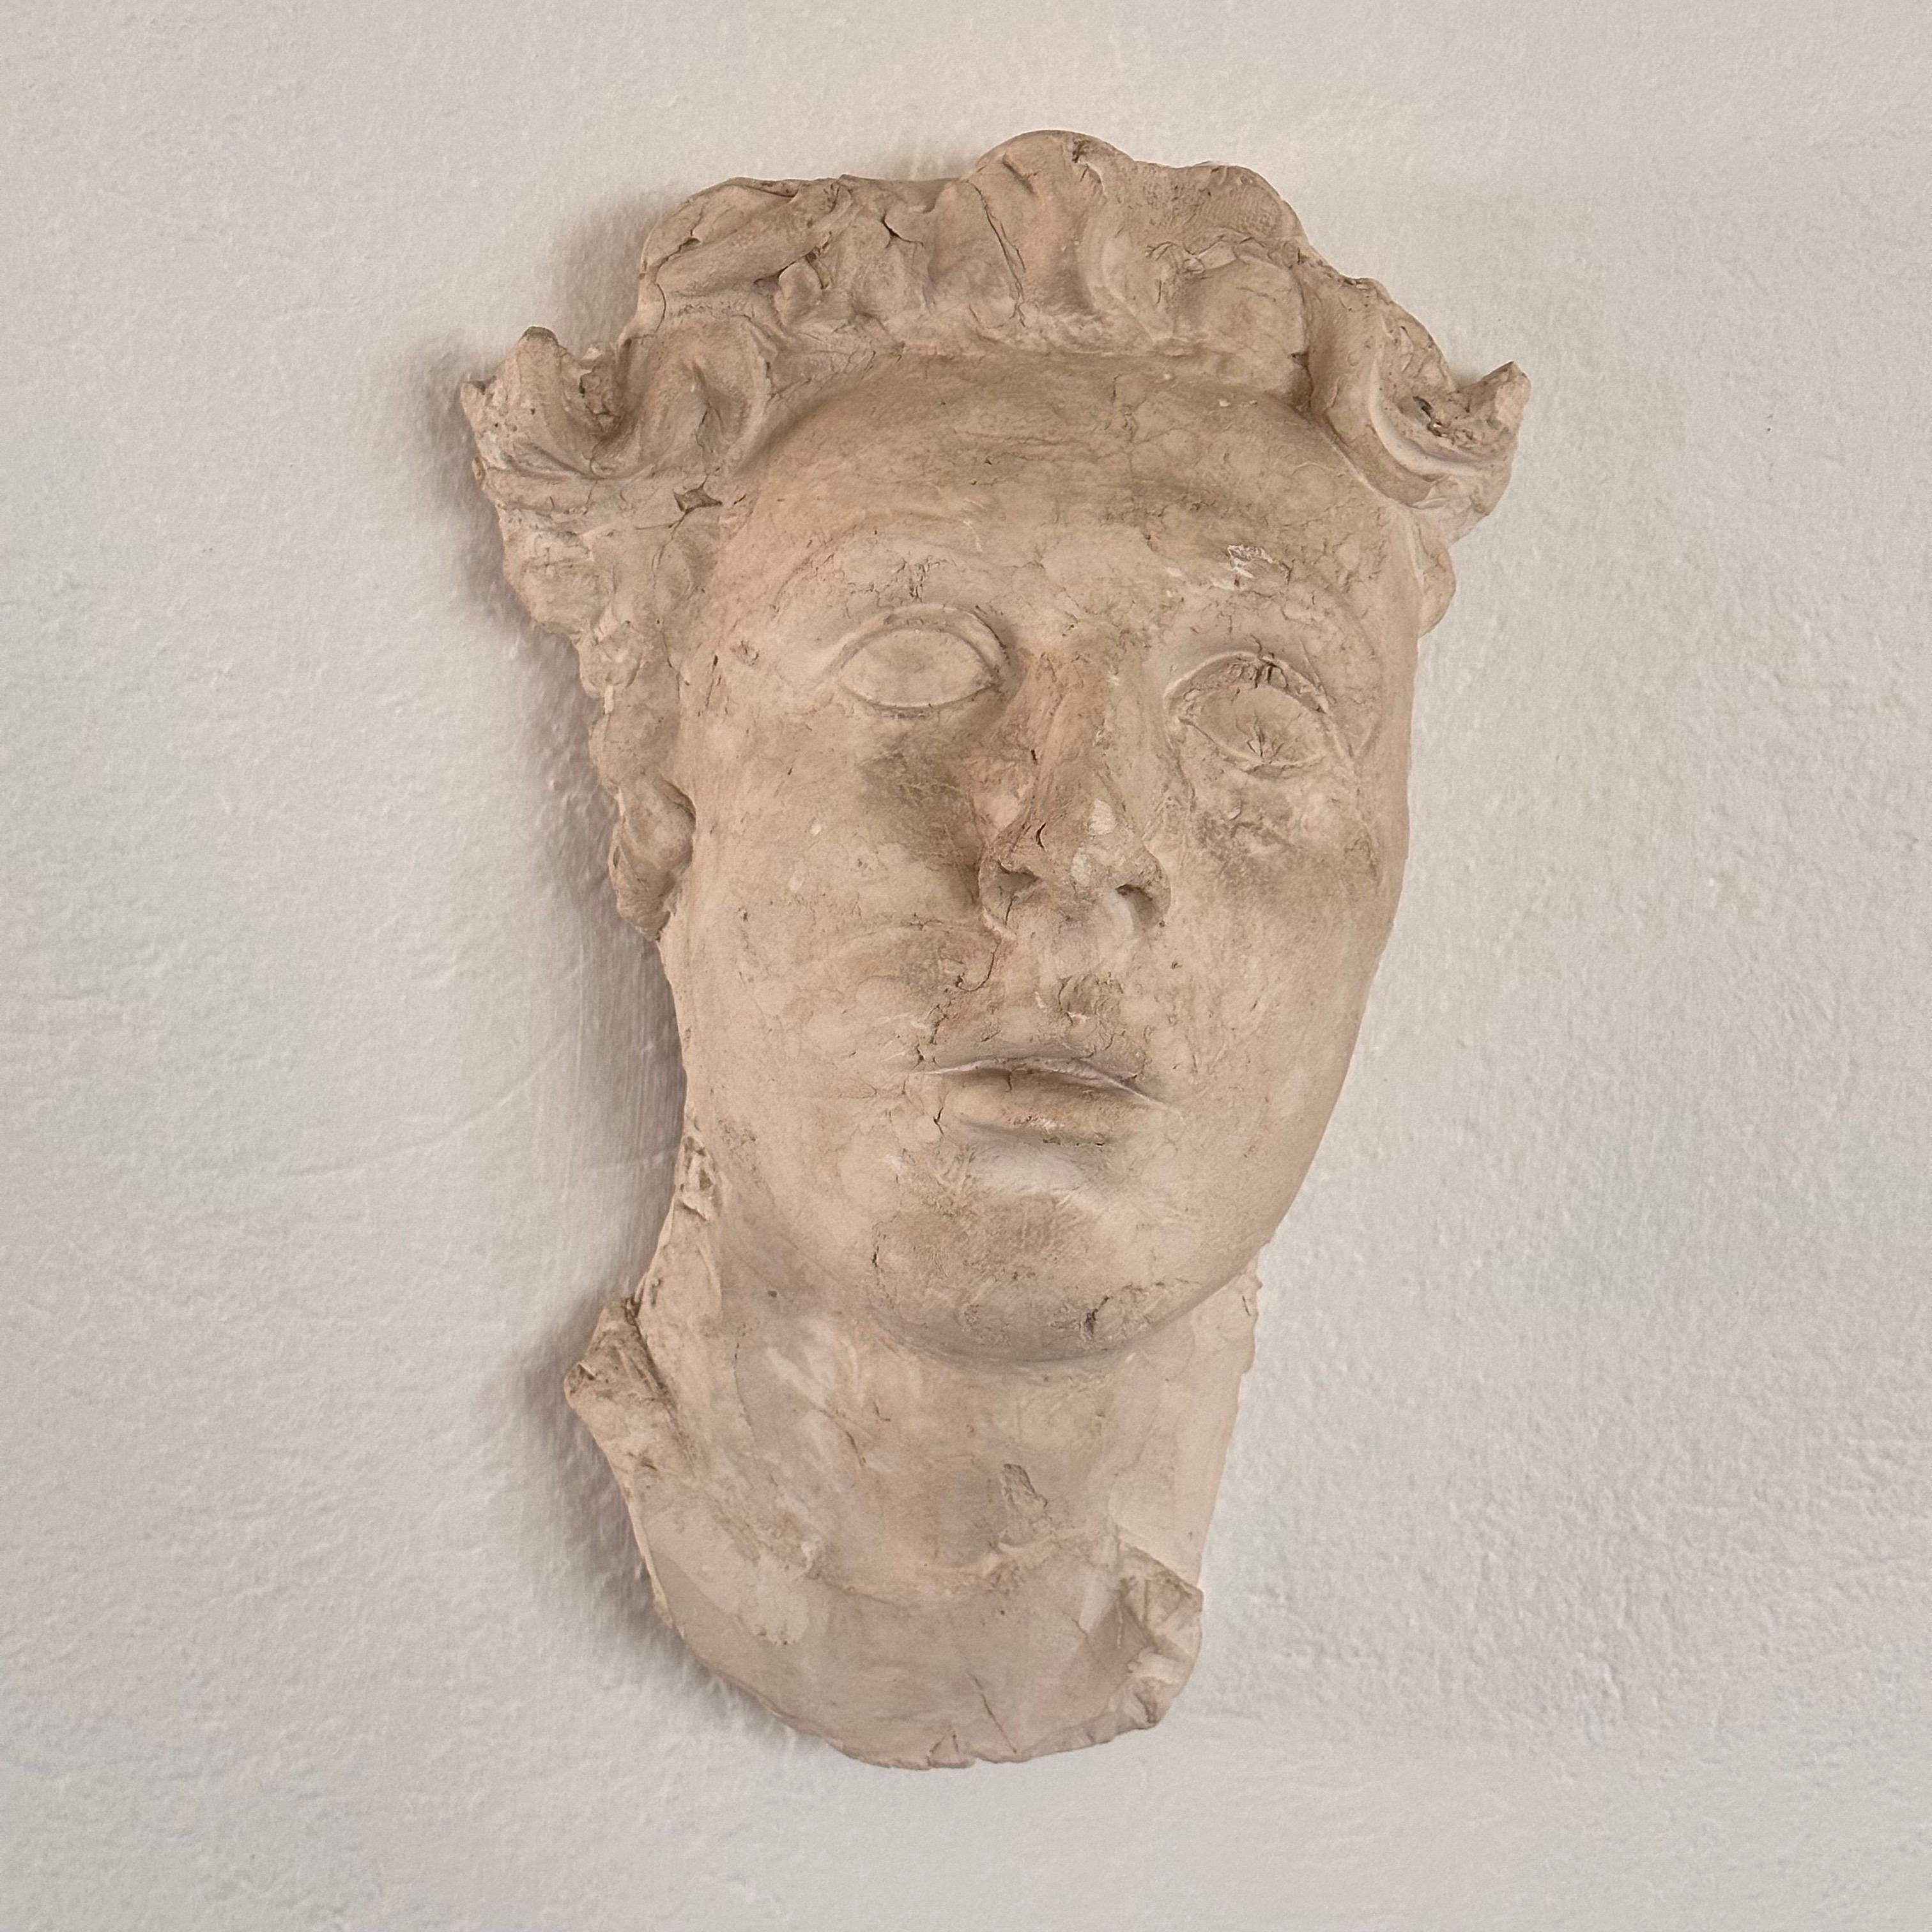 Stunning Decorative Roman Gypsum Face, 1970s Reproduction For Sale 6